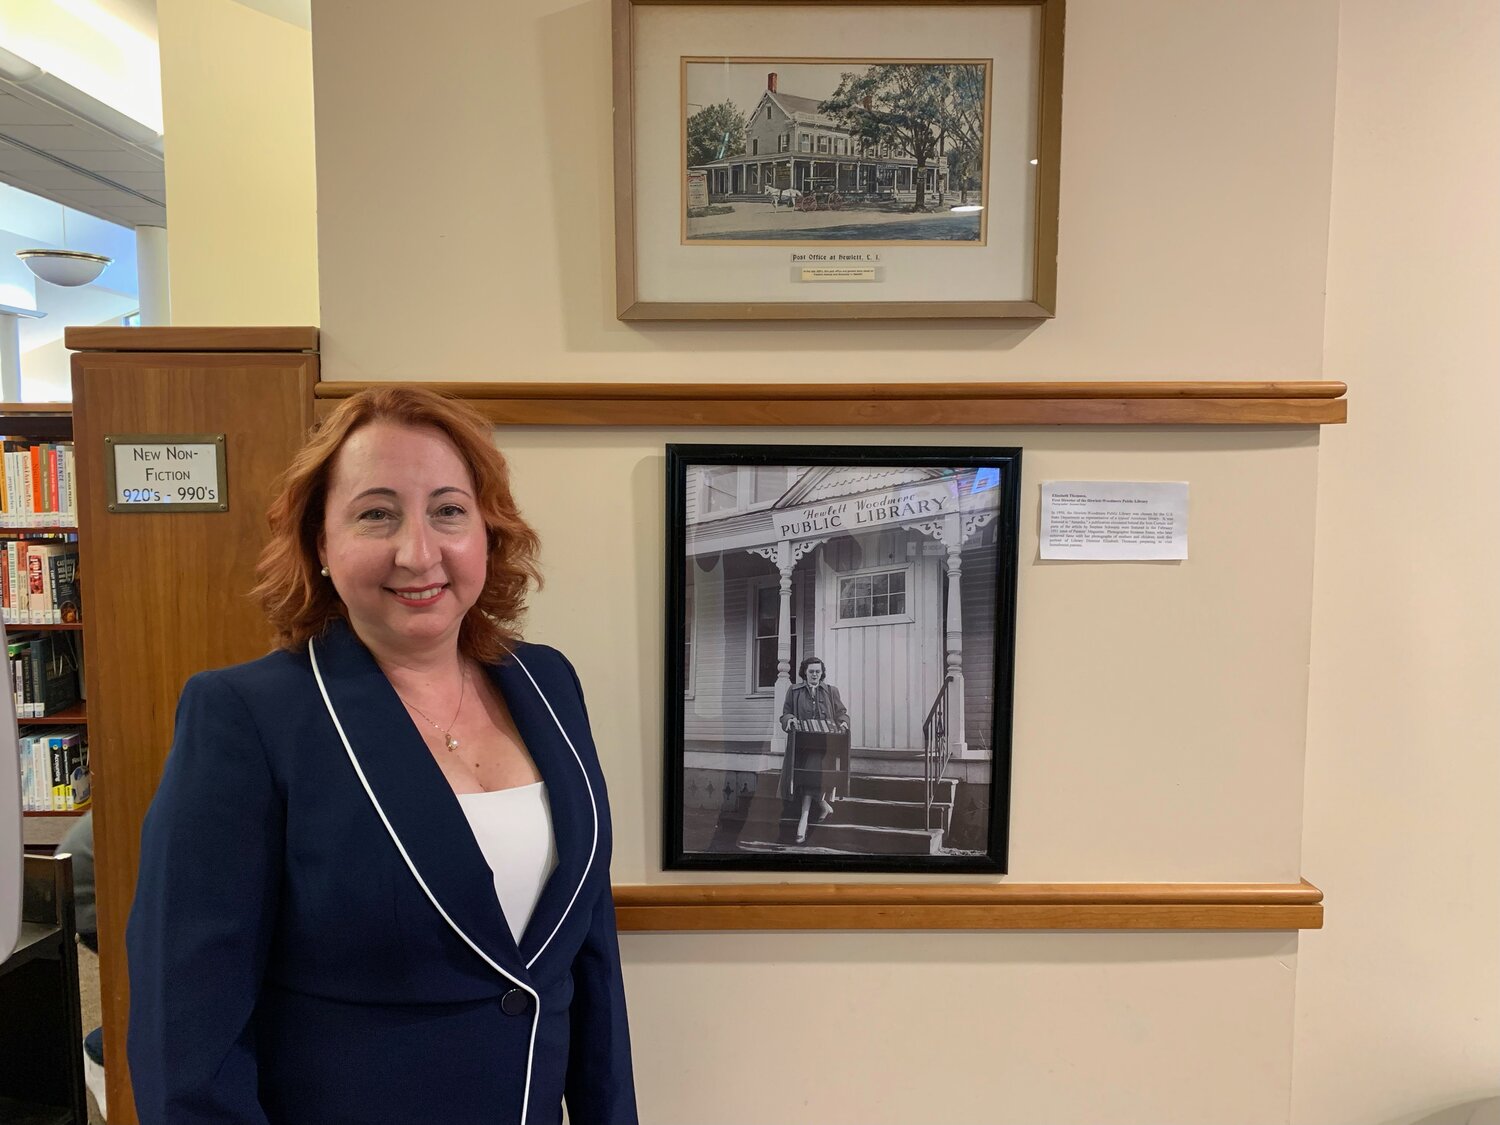 The Hewlett-Woodmere Public Library’s new director, Michelle Young, took over on May 1. In black and white to her left is the library’s first director, Elizabeth Thomson.